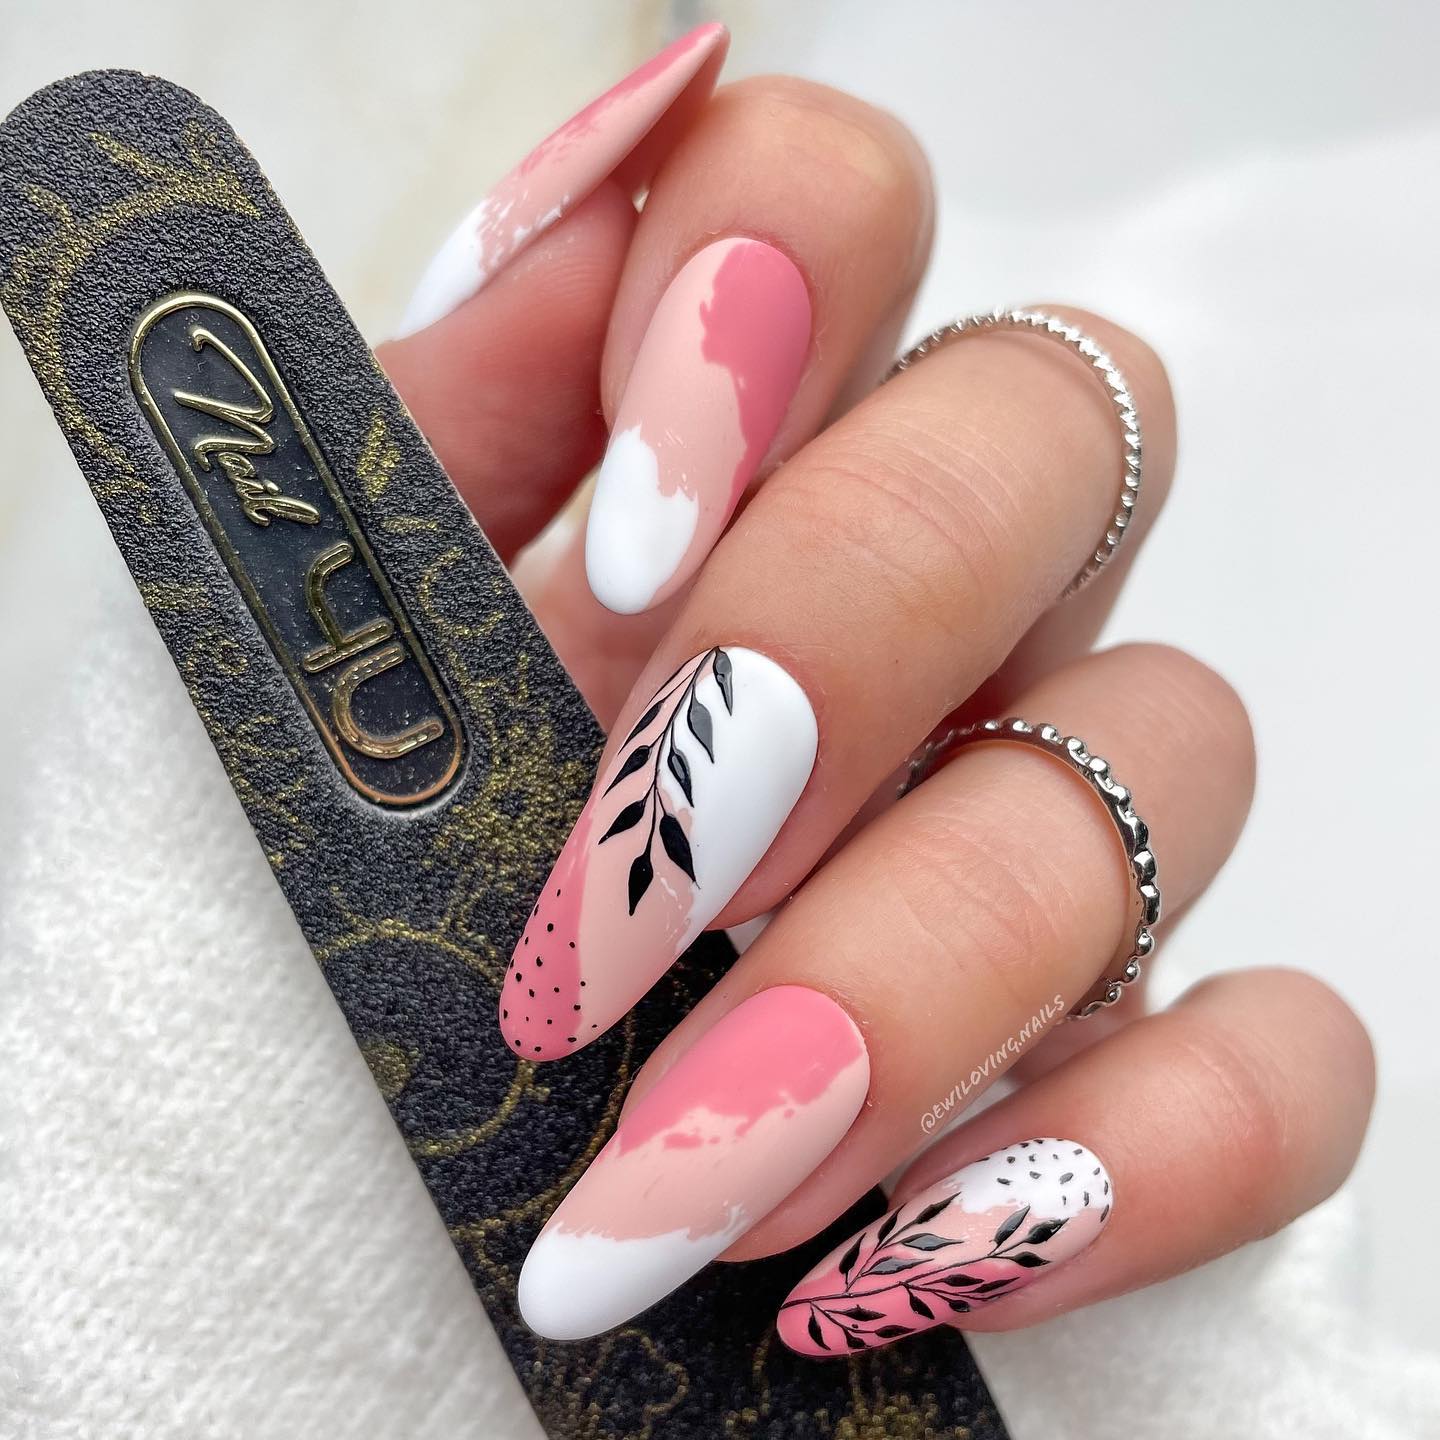 50 Best Nail Designs Trends To Try Out In 2022 images 39